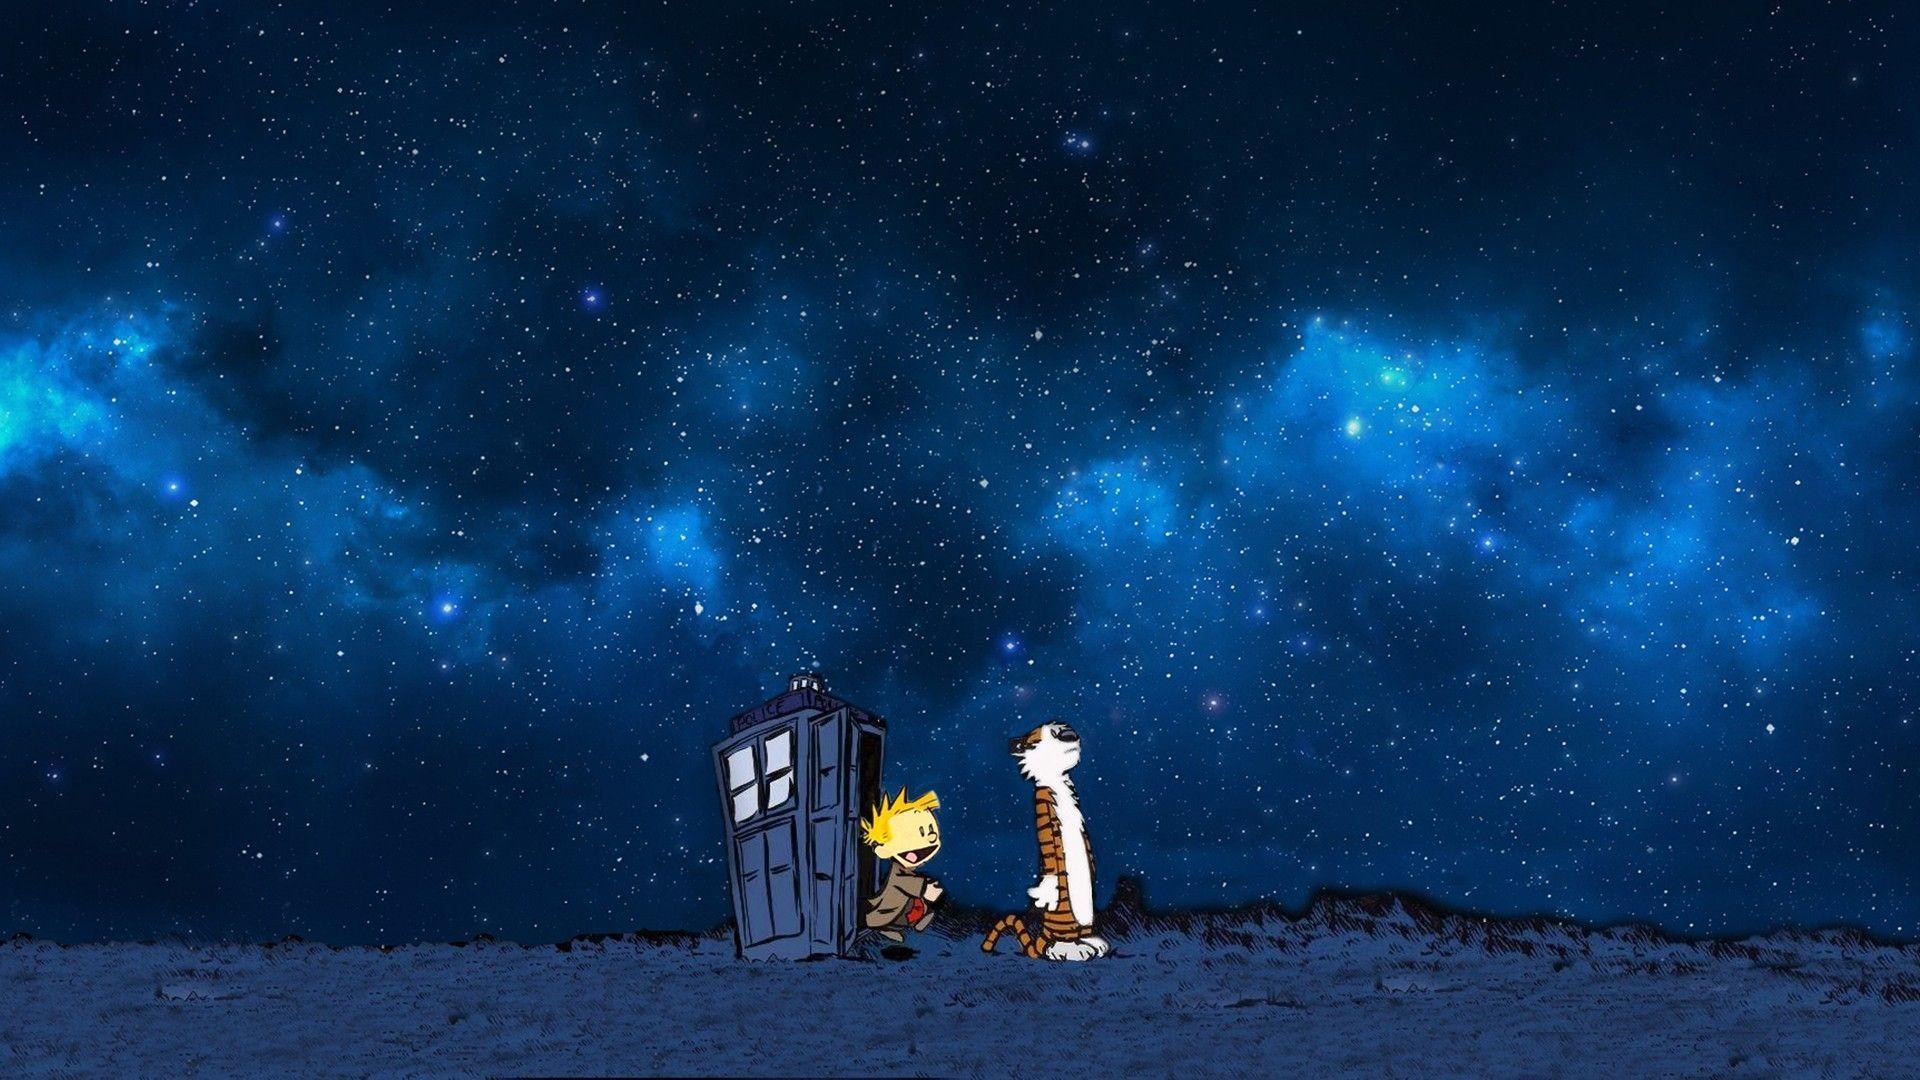 if you need a wallpaper of Calvin and Hobbes using the TARDIS, I've